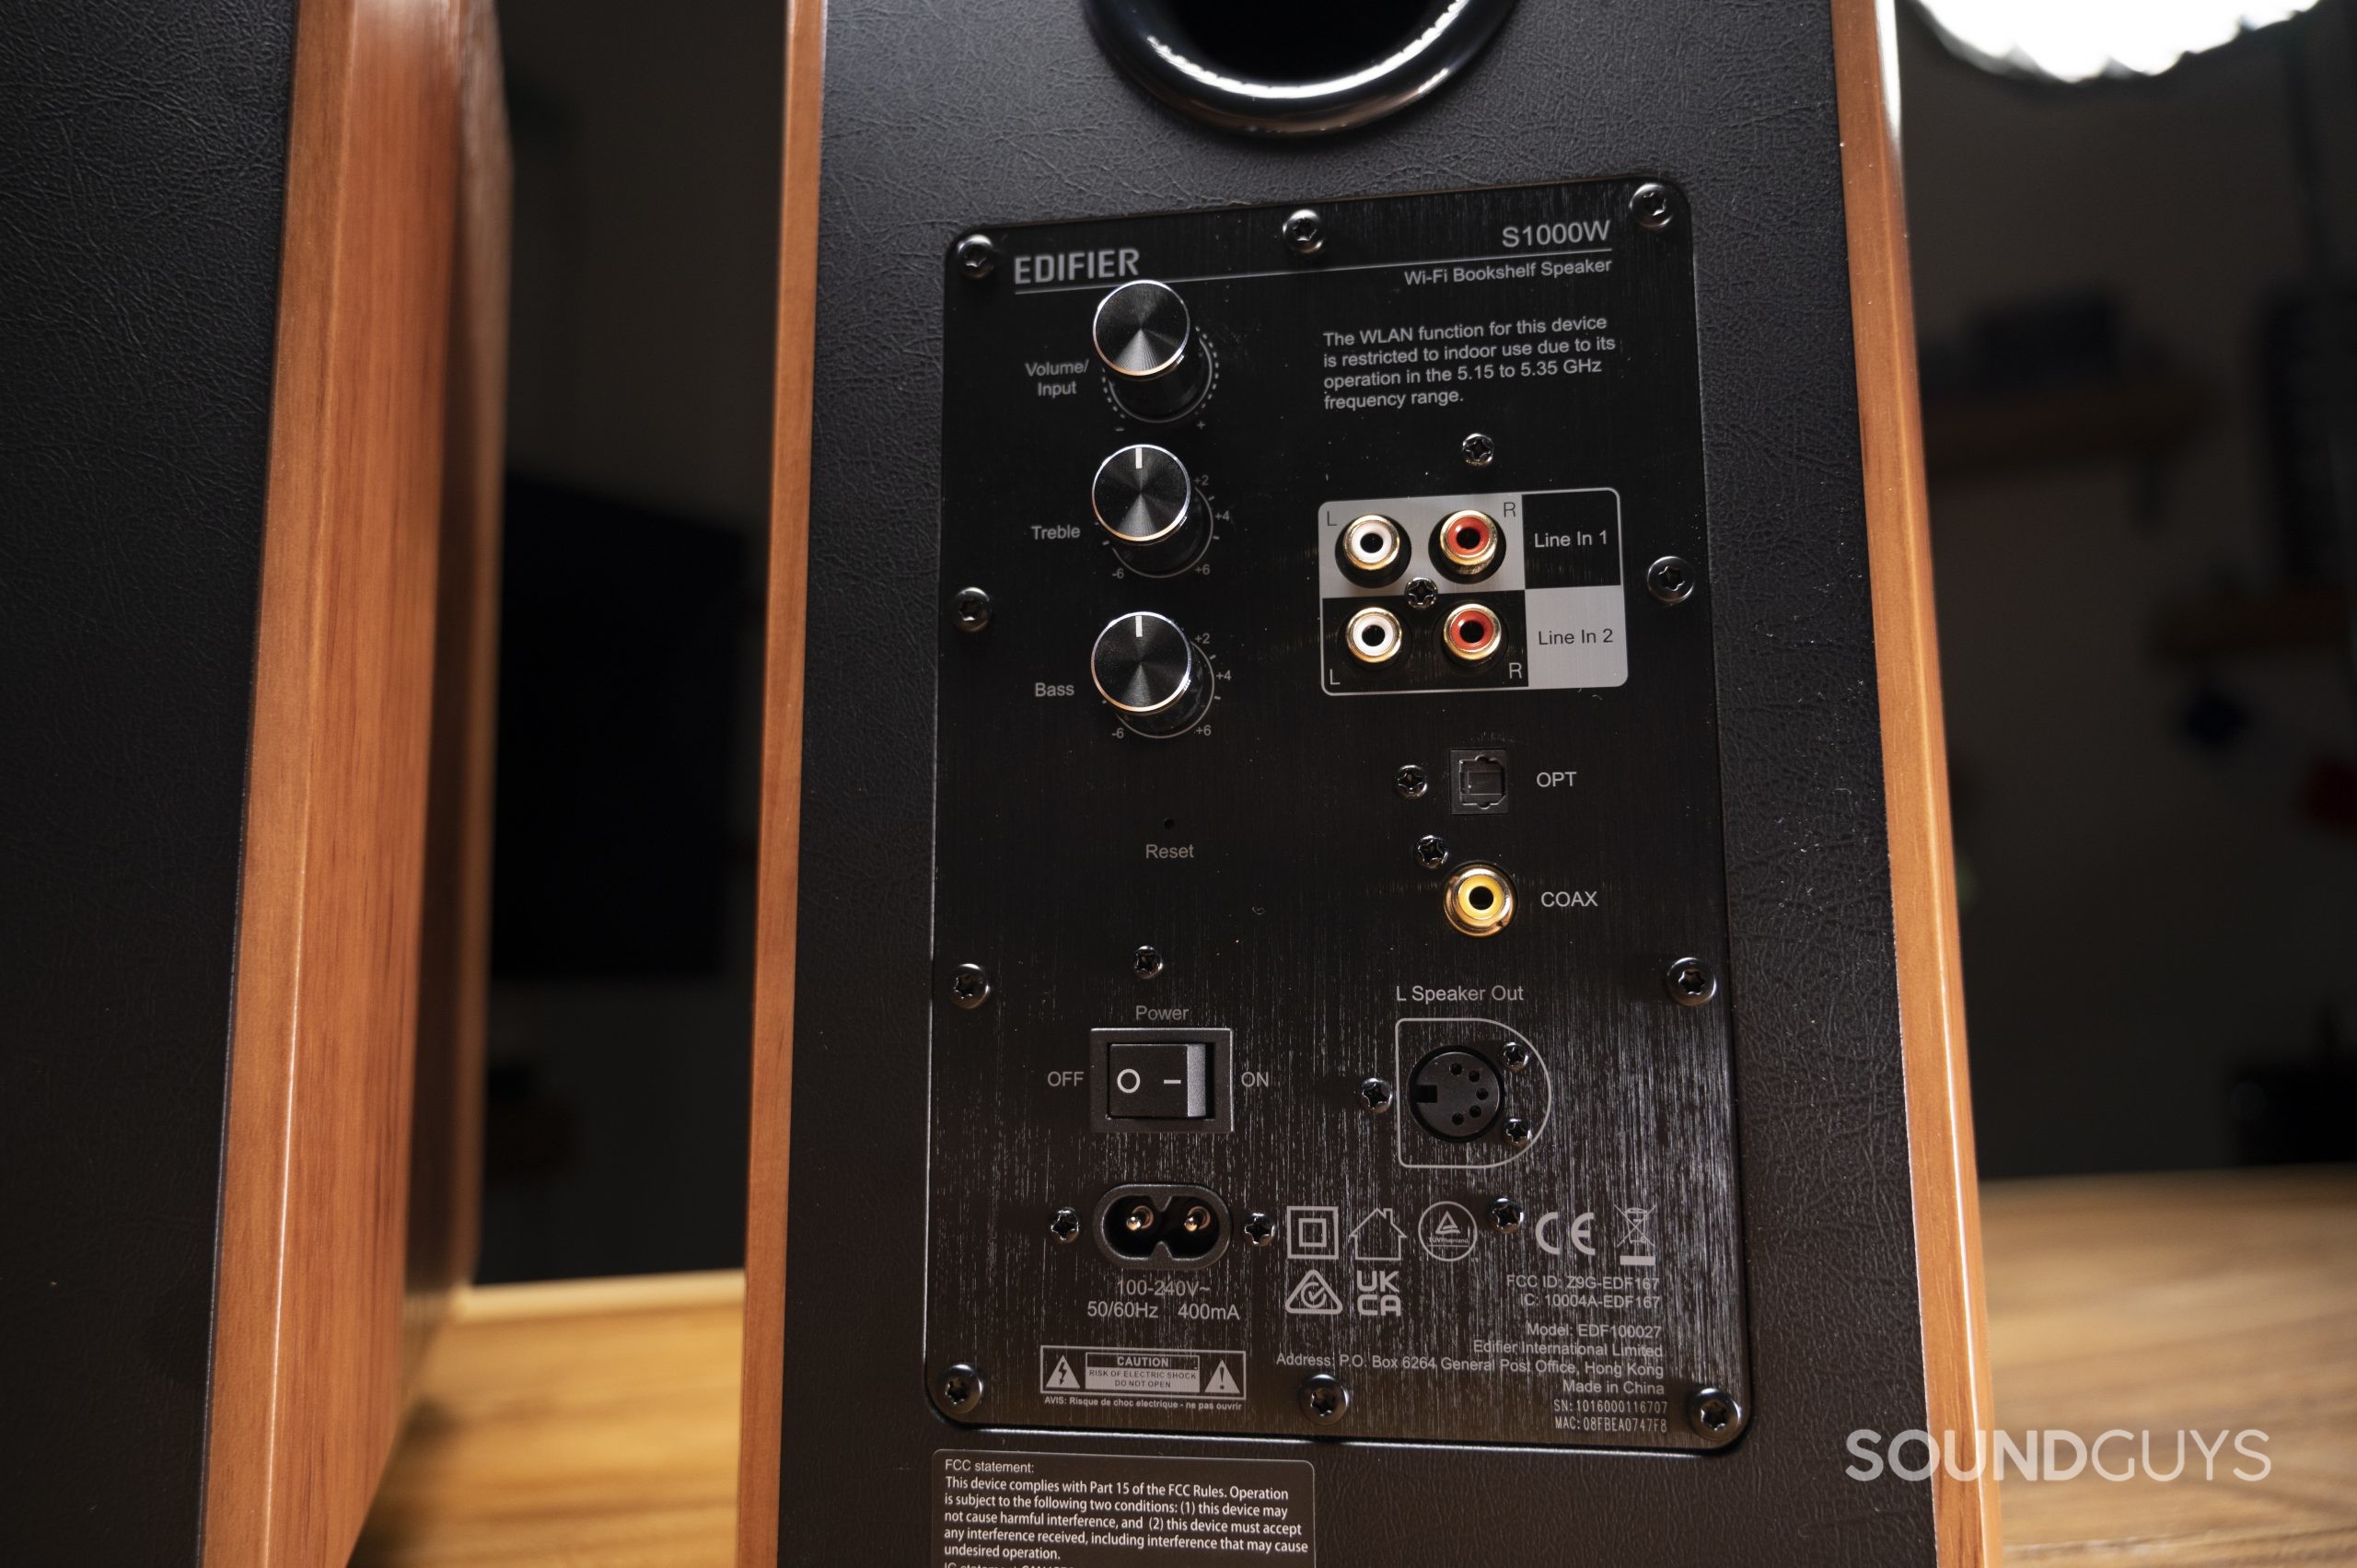 The back of the right Edifier S1000W speaker shows the inputs and ports.